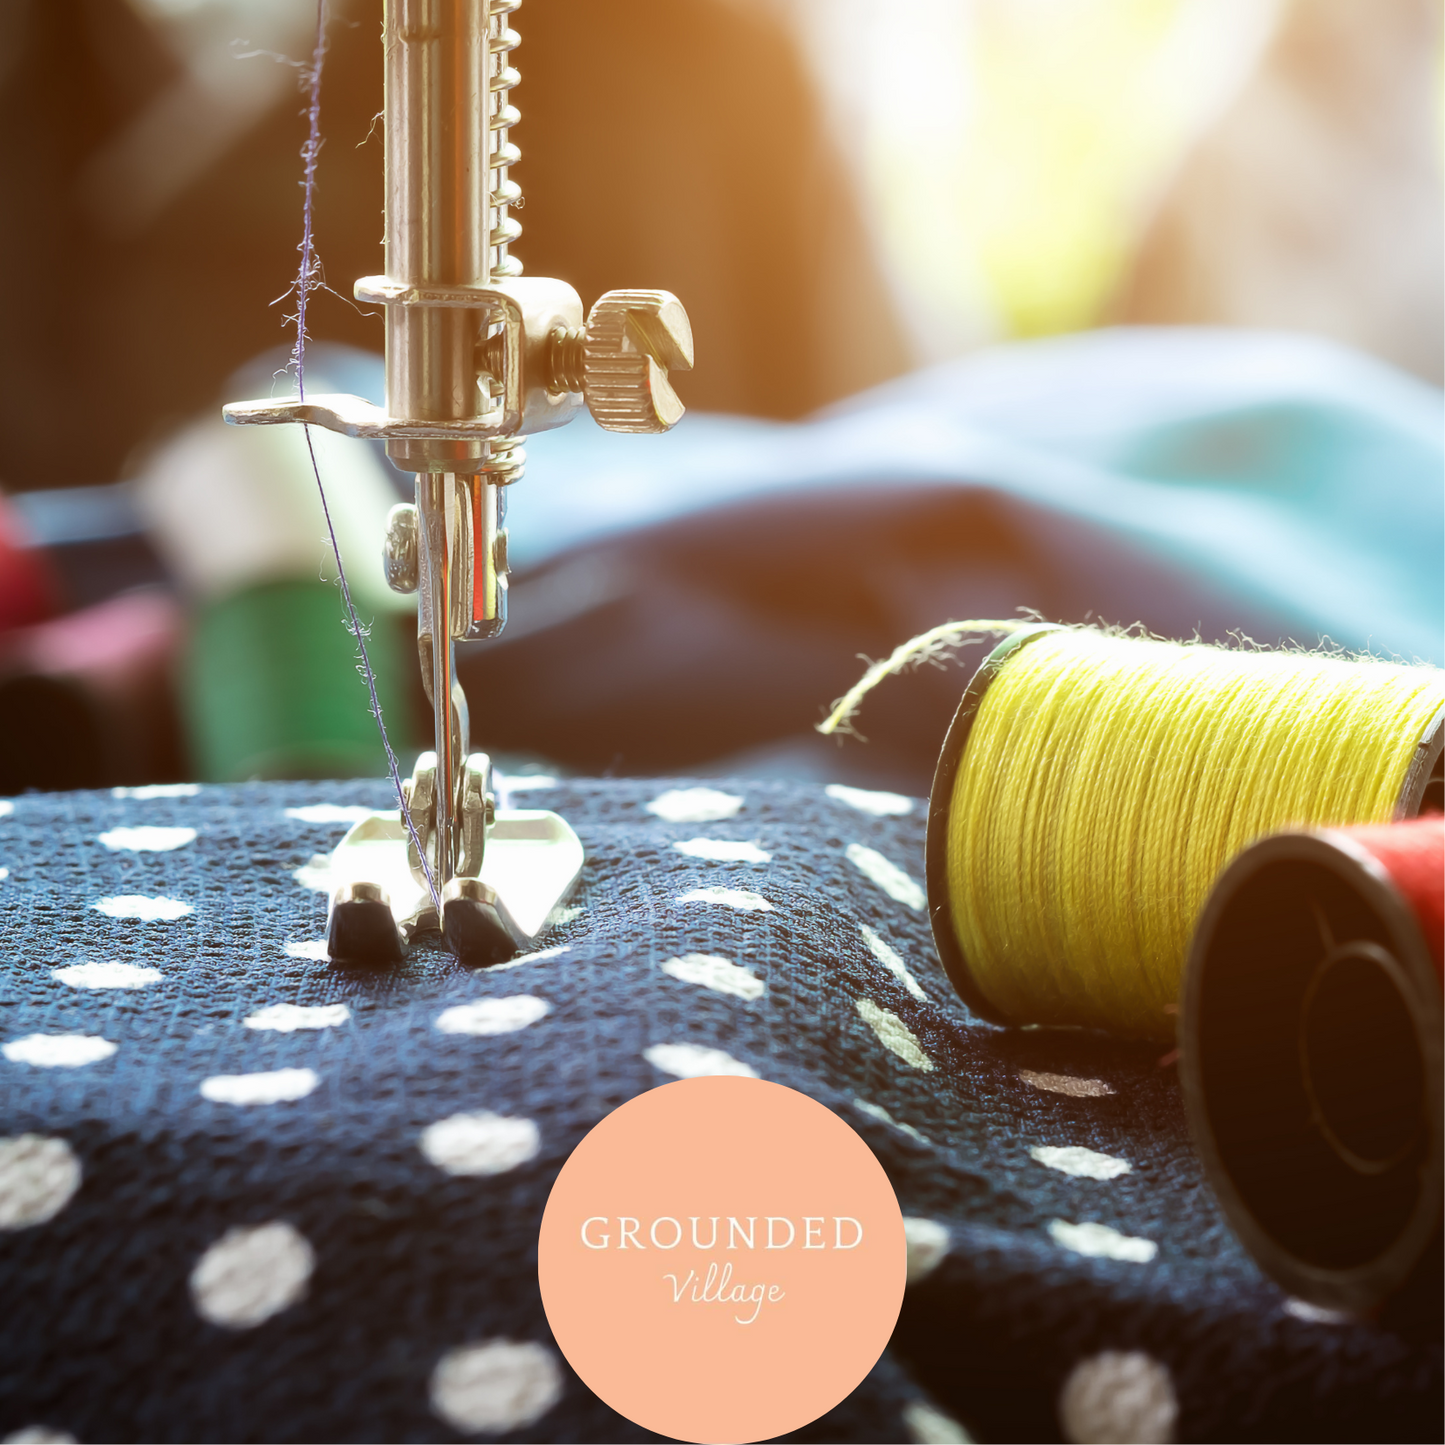 Private Learn to sew classes- one on one